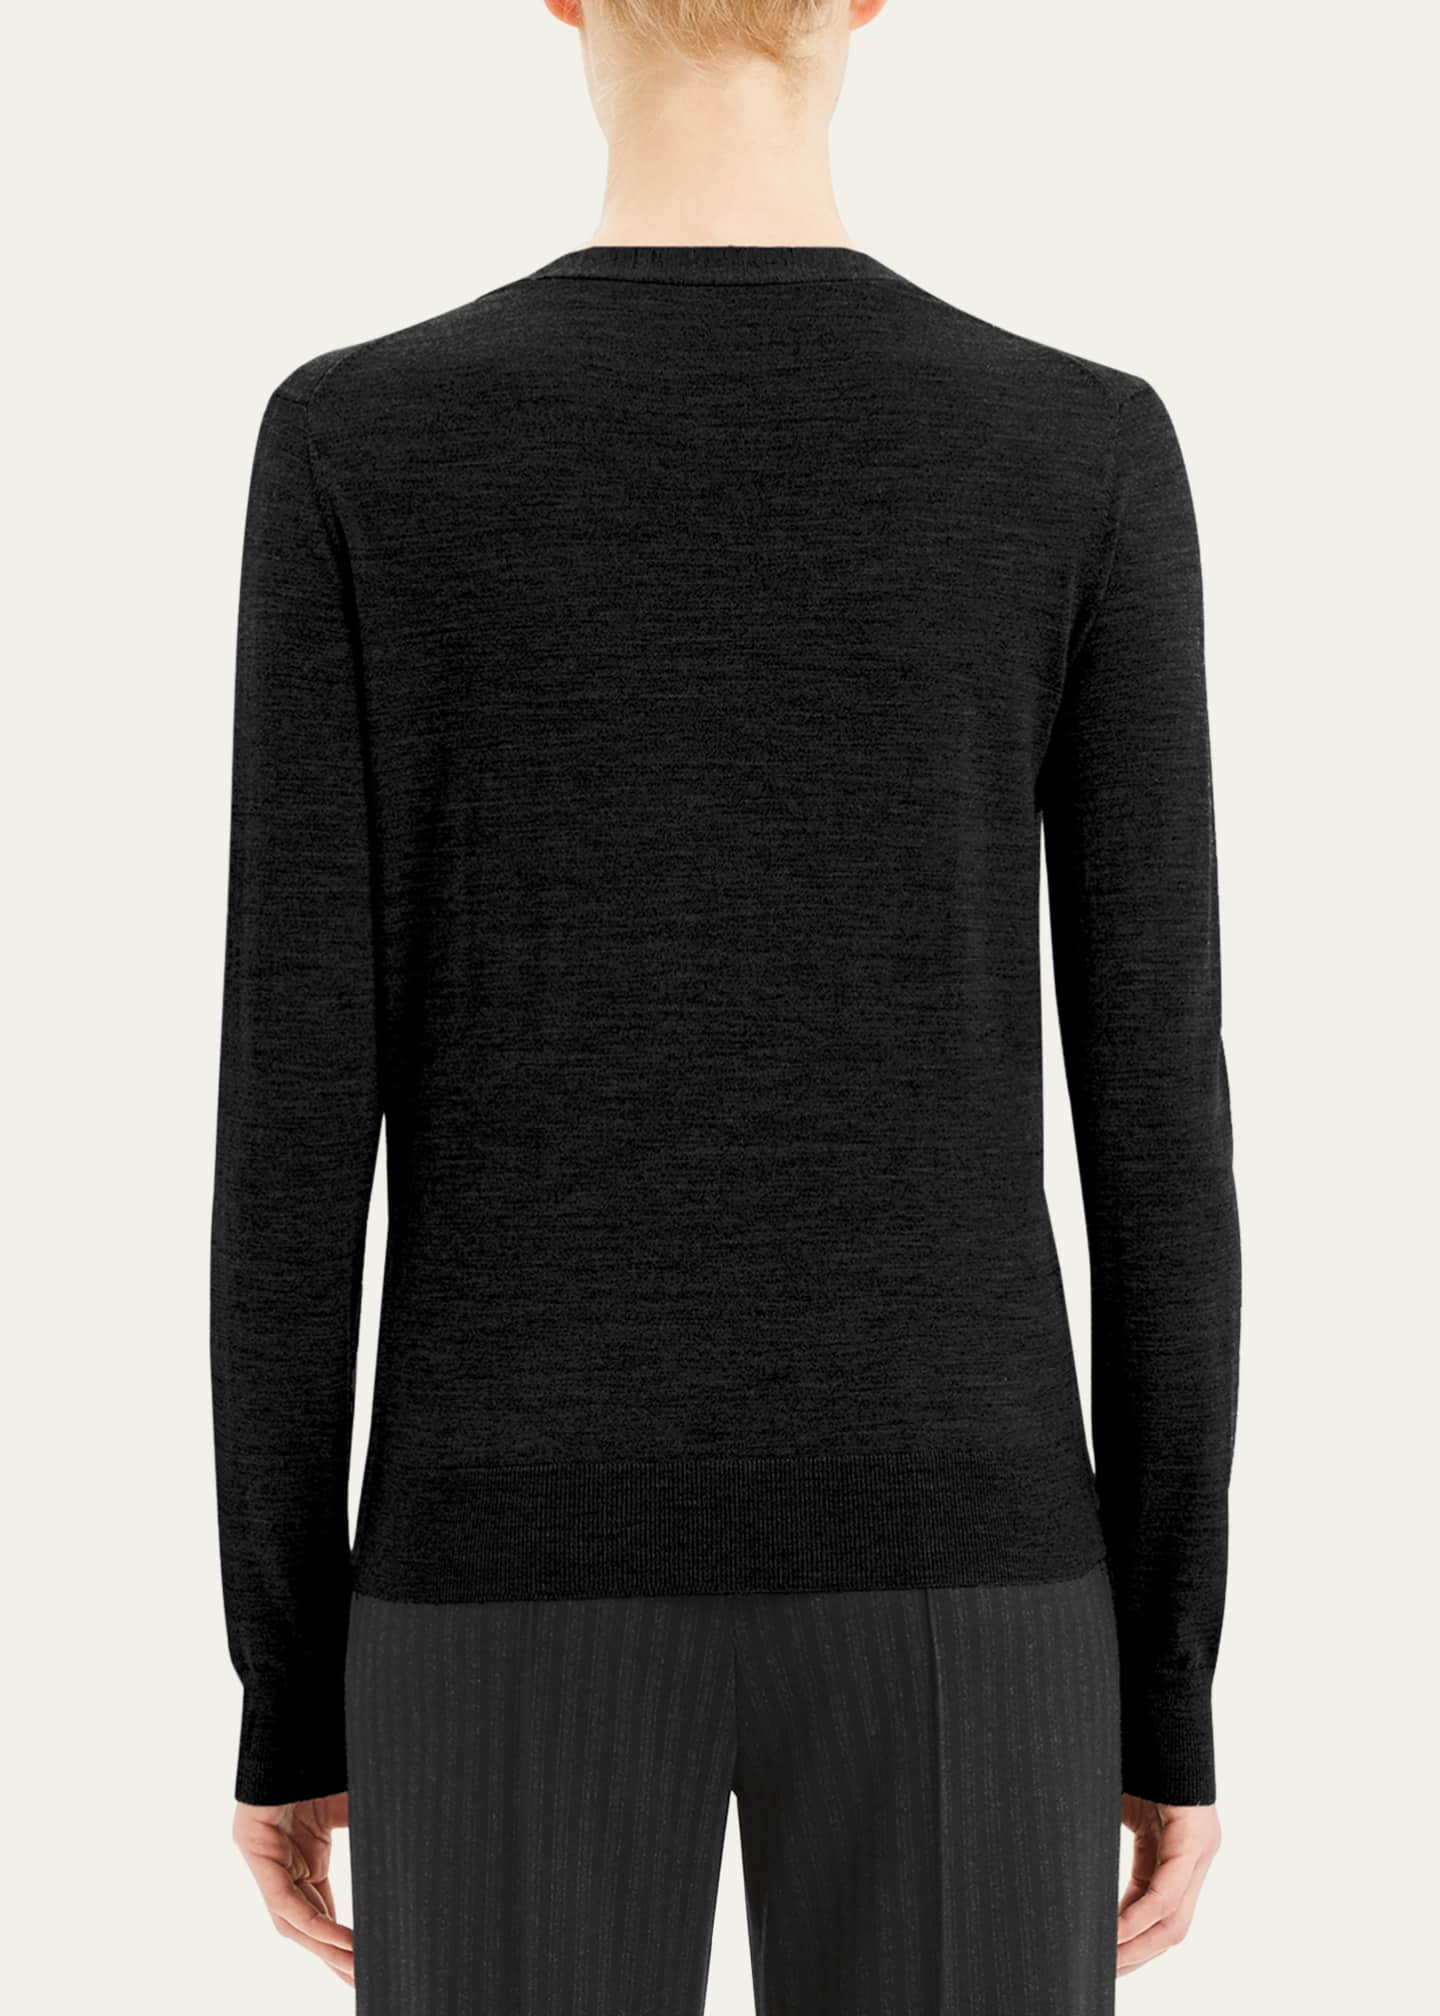 Theory V-Neck Button-Front Regal Wool Cardigan - Bergdorf Goodman